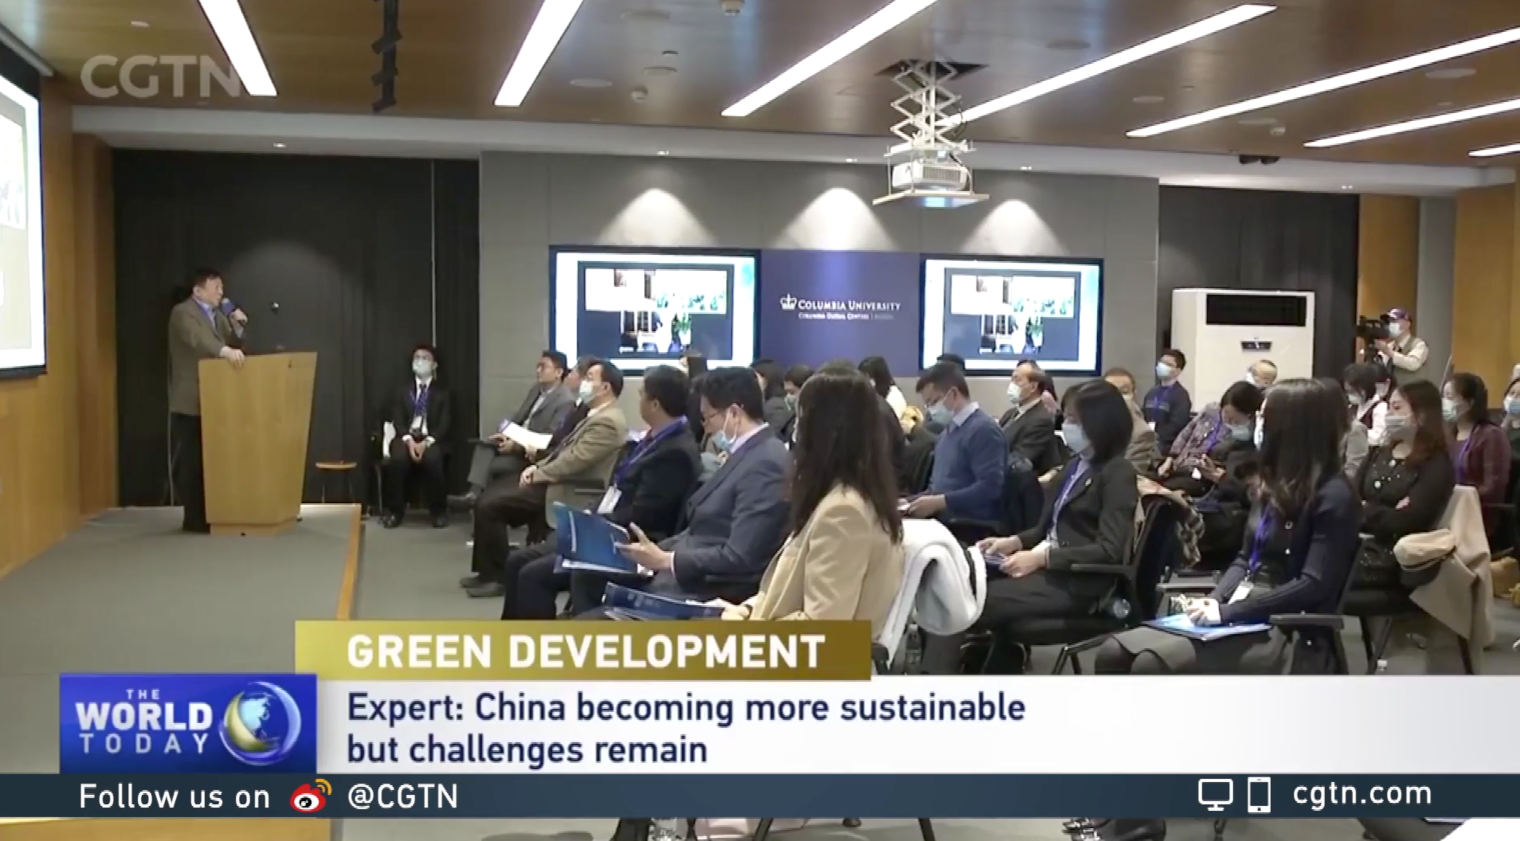 Earth Institute's Launch Event for the Evaluation Report on China's Sustainable Development